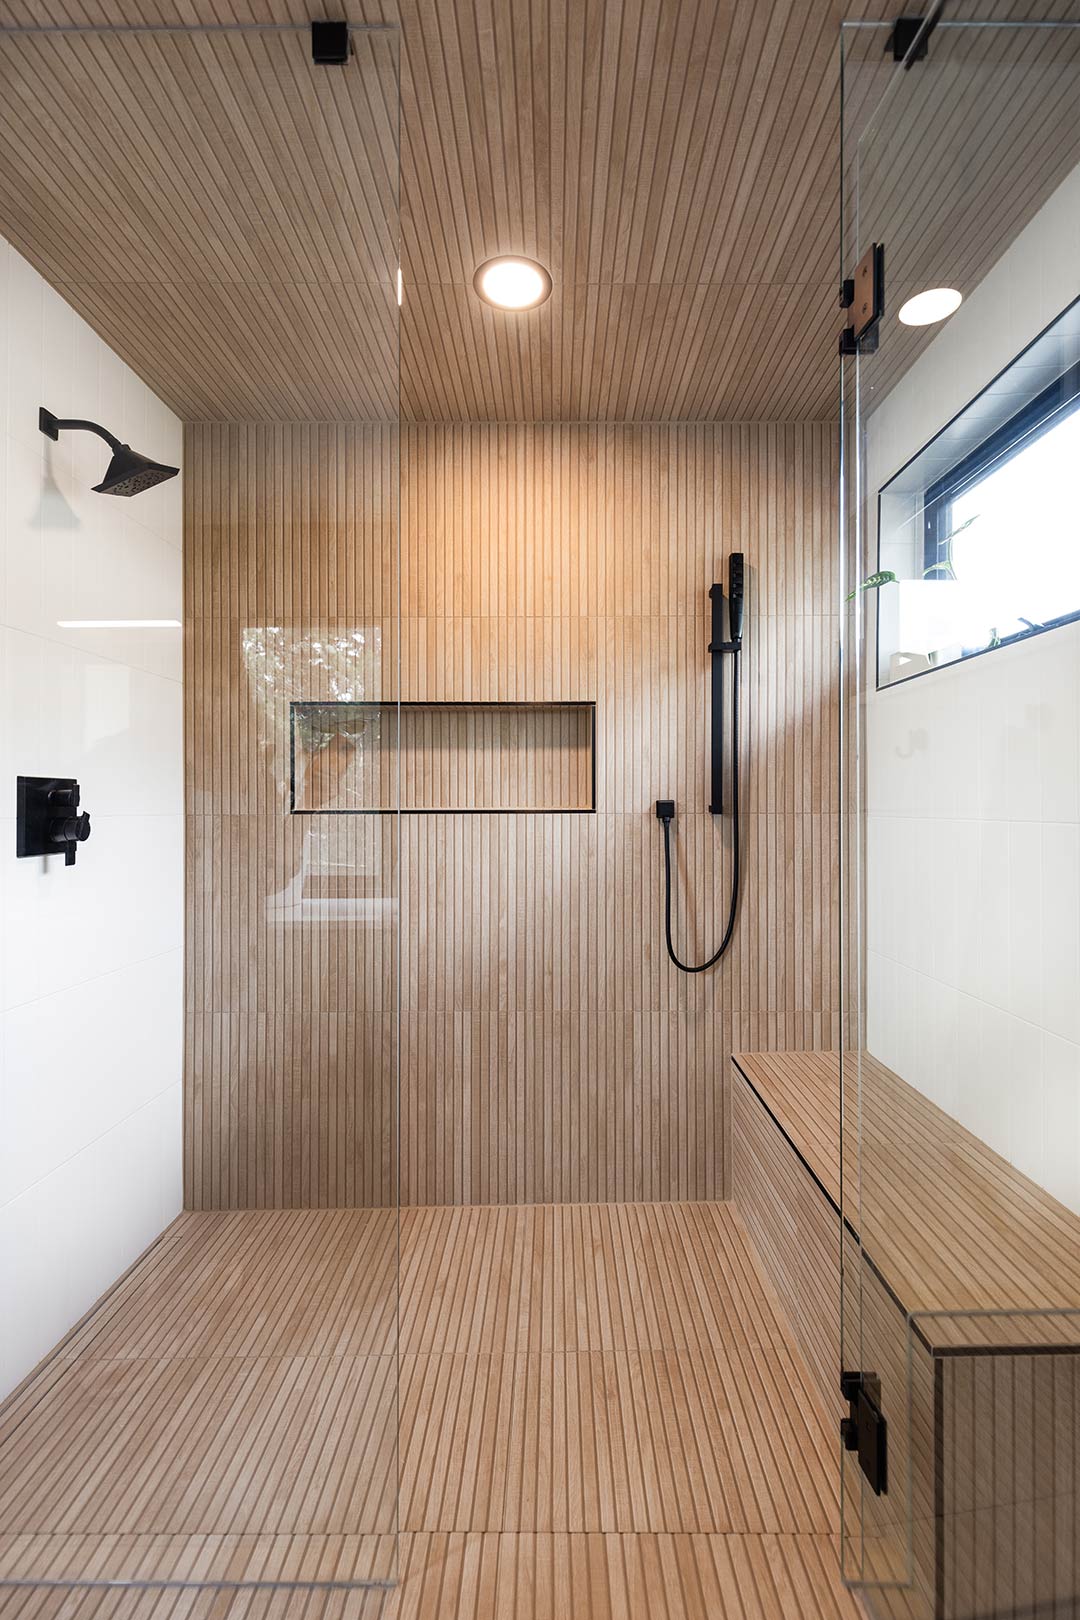 Modern walk in shower with a modern linear drain, frameless glass doors, and matte black hardware and fixtures, creating a spa-like retreat within the home.